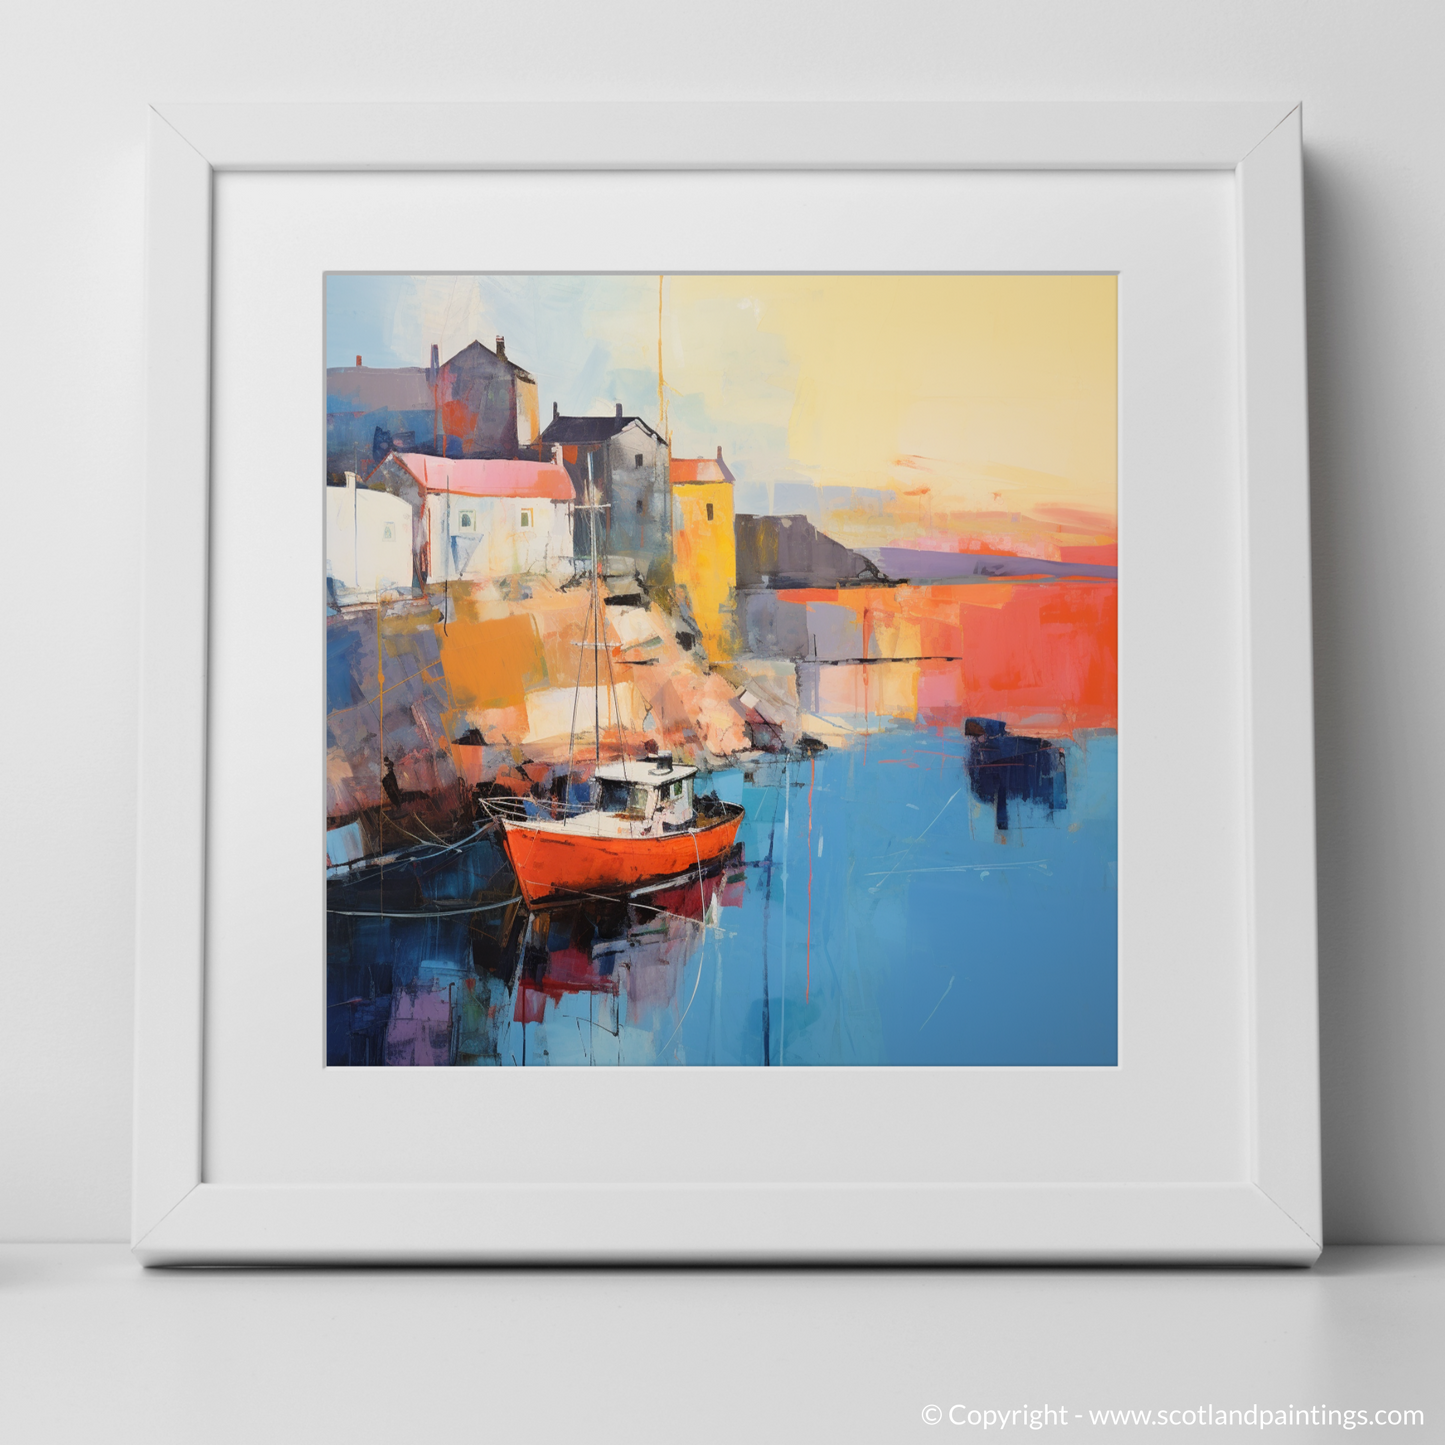 Golden Hour at Dunbar Harbour: An Abstract Ode to Scotland's Seascapes